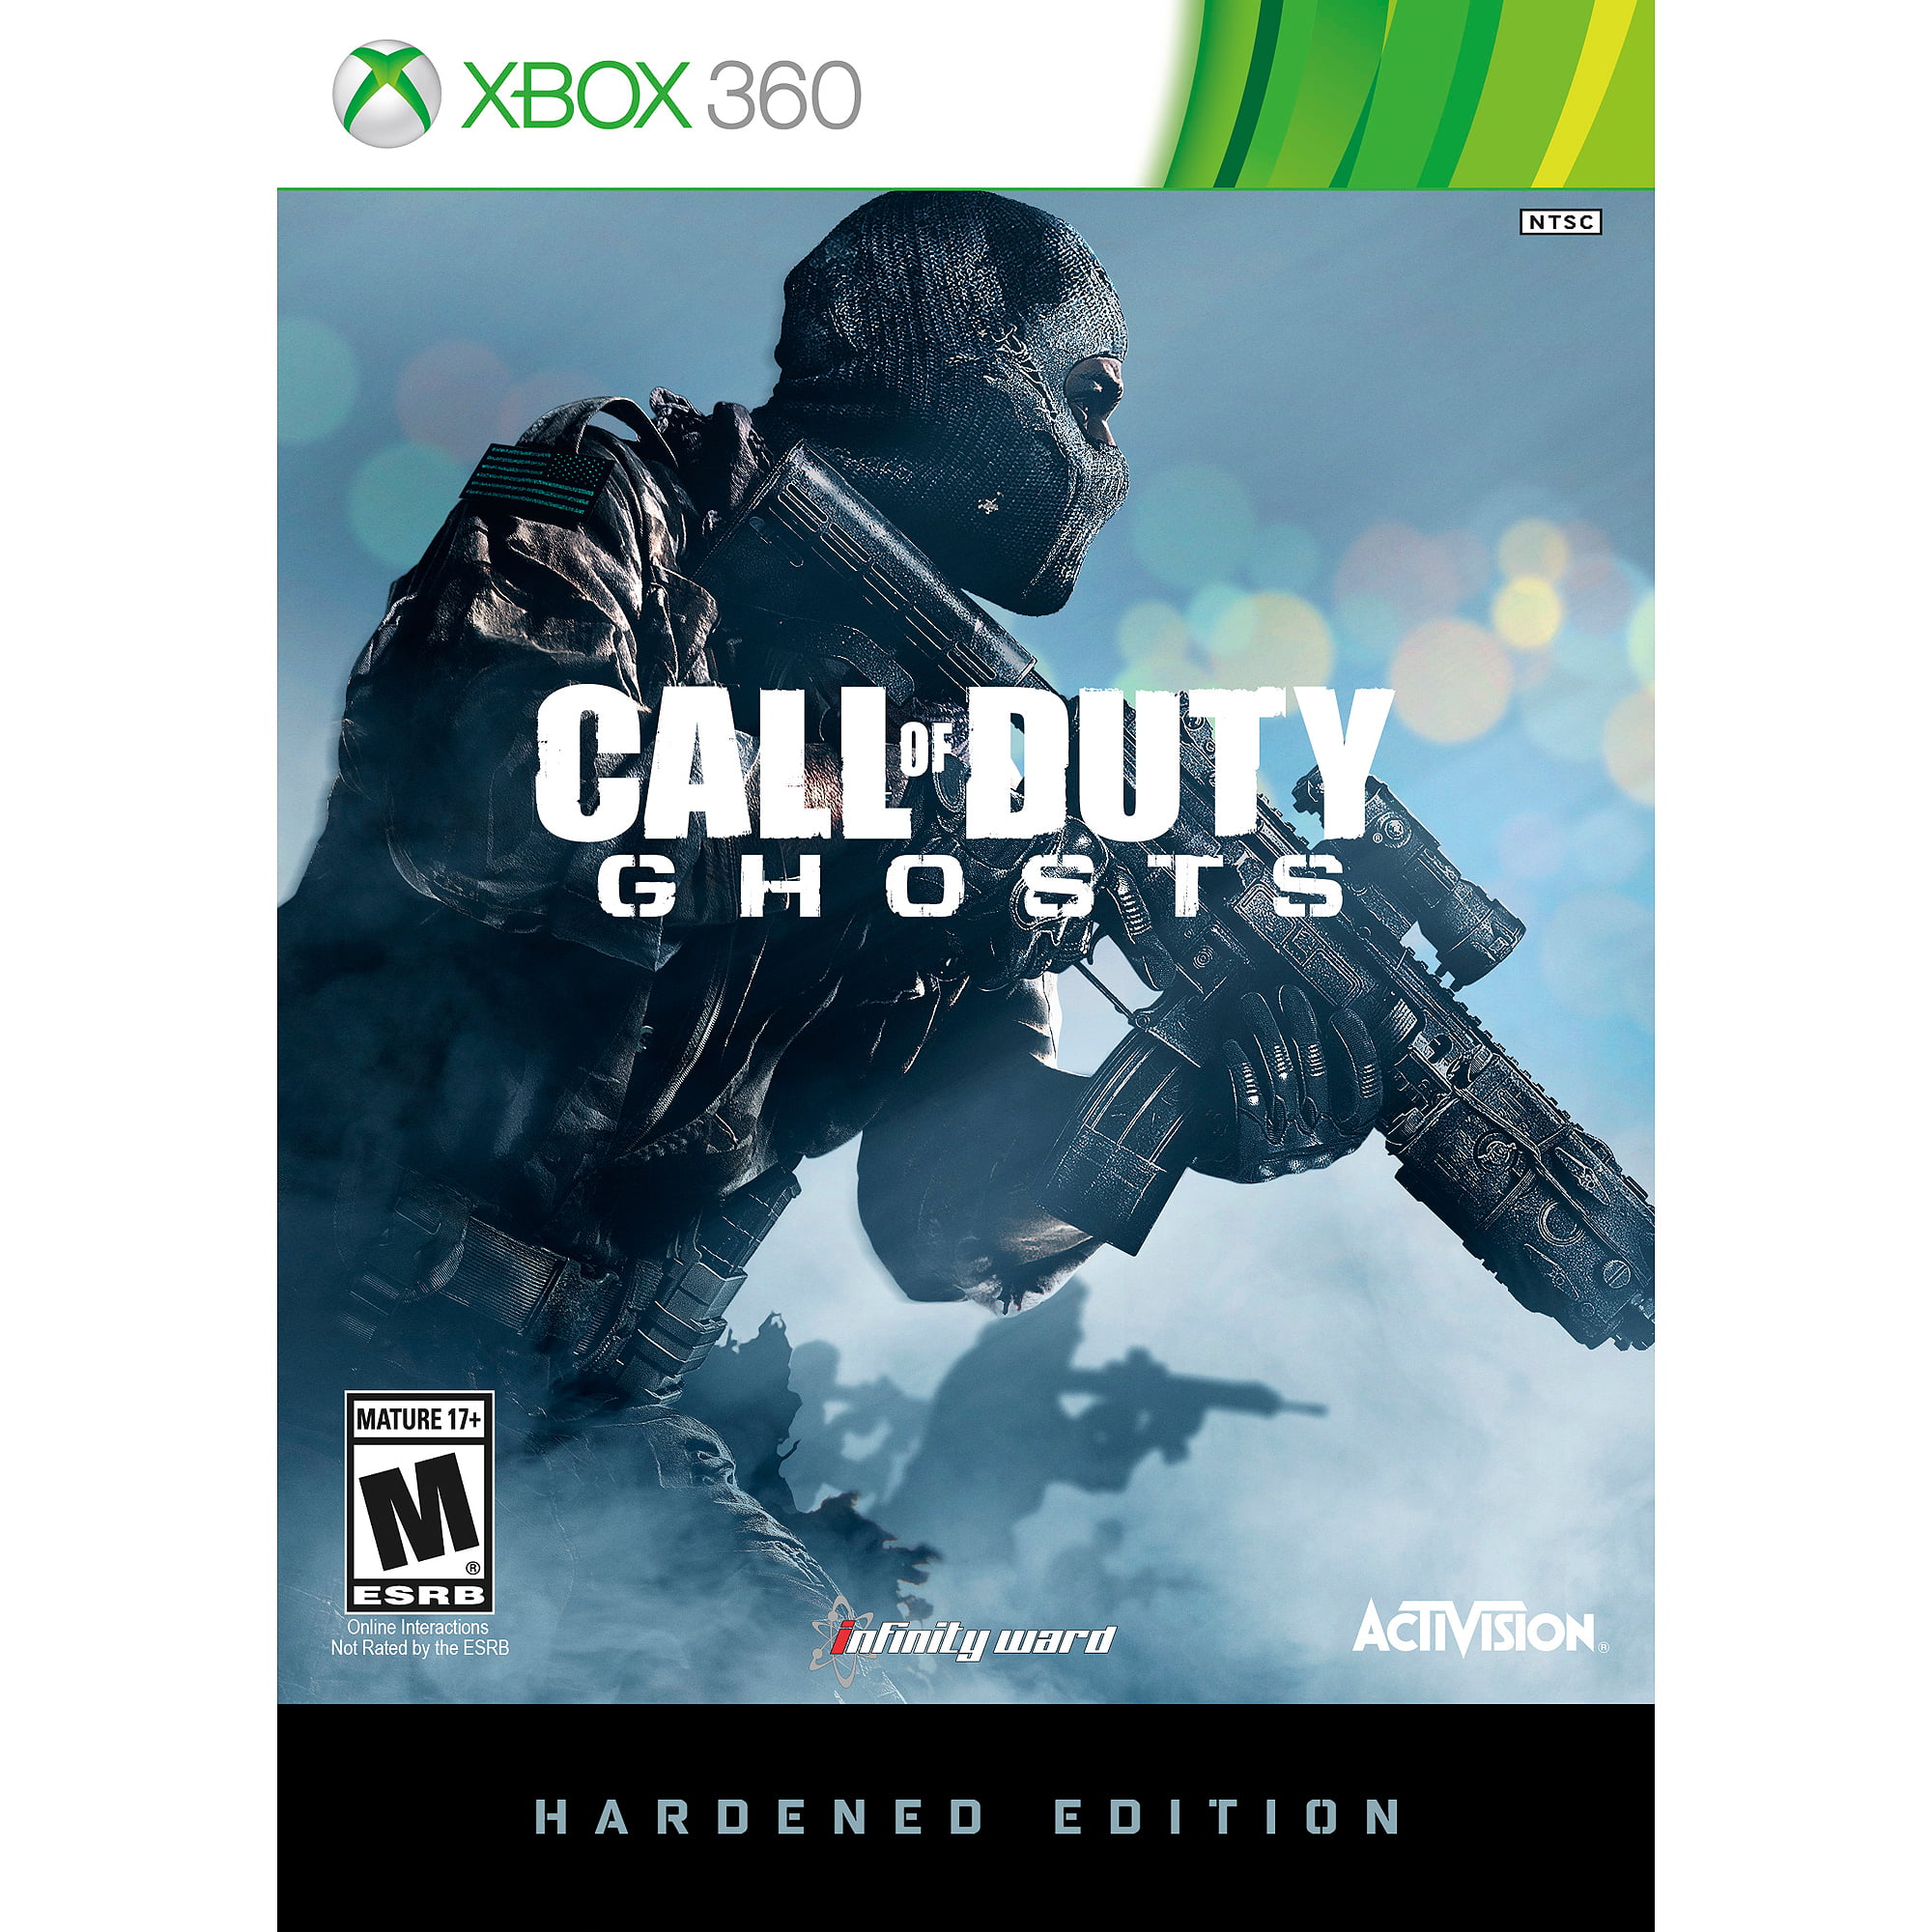 Call of Duty: Ghosts (Xbox One) - The Cover Project